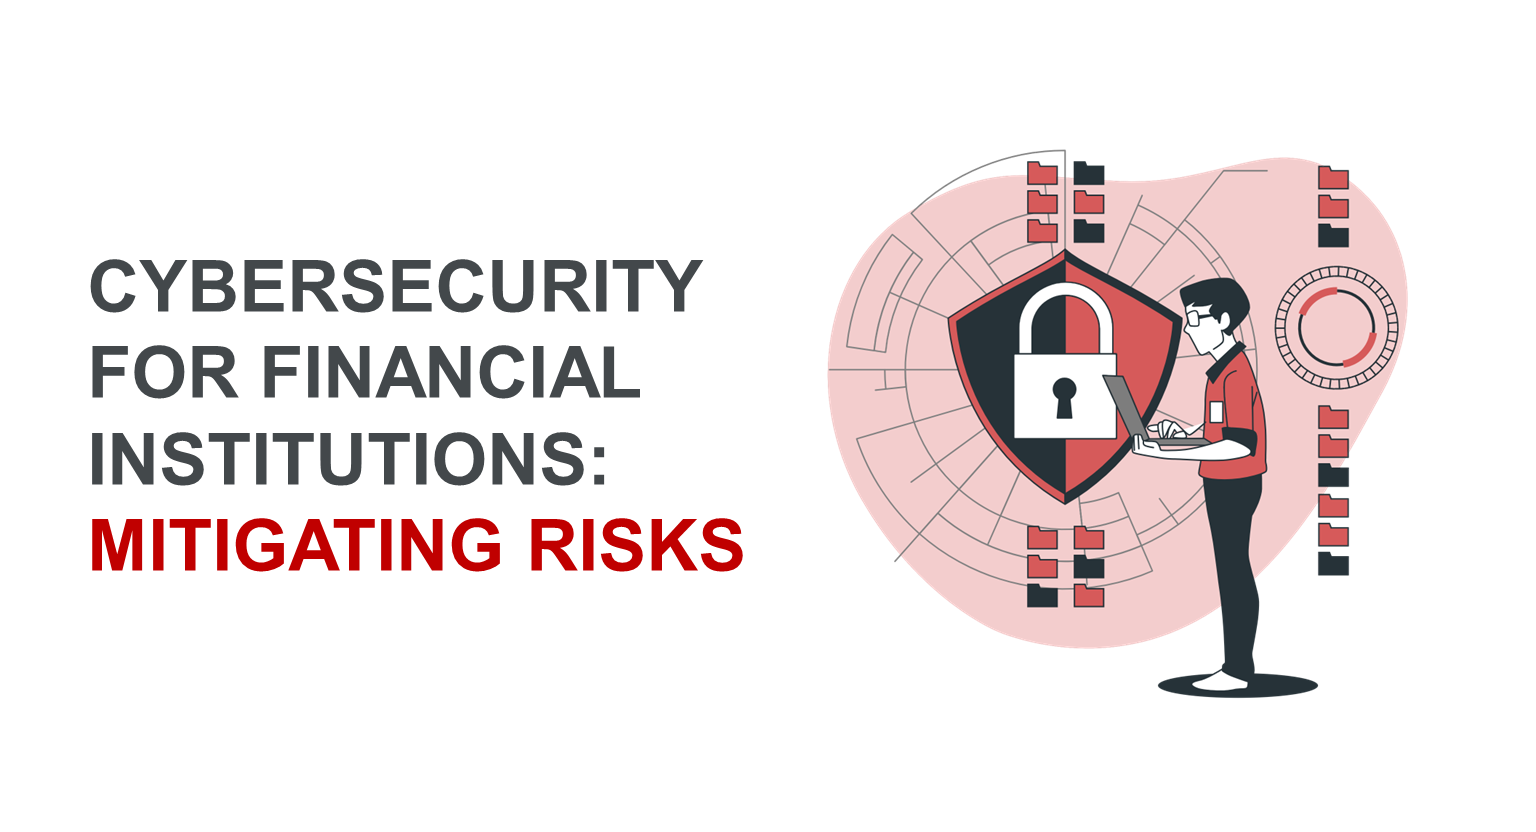 Cybersecurity for Financial Institutions: Mitigating Risks